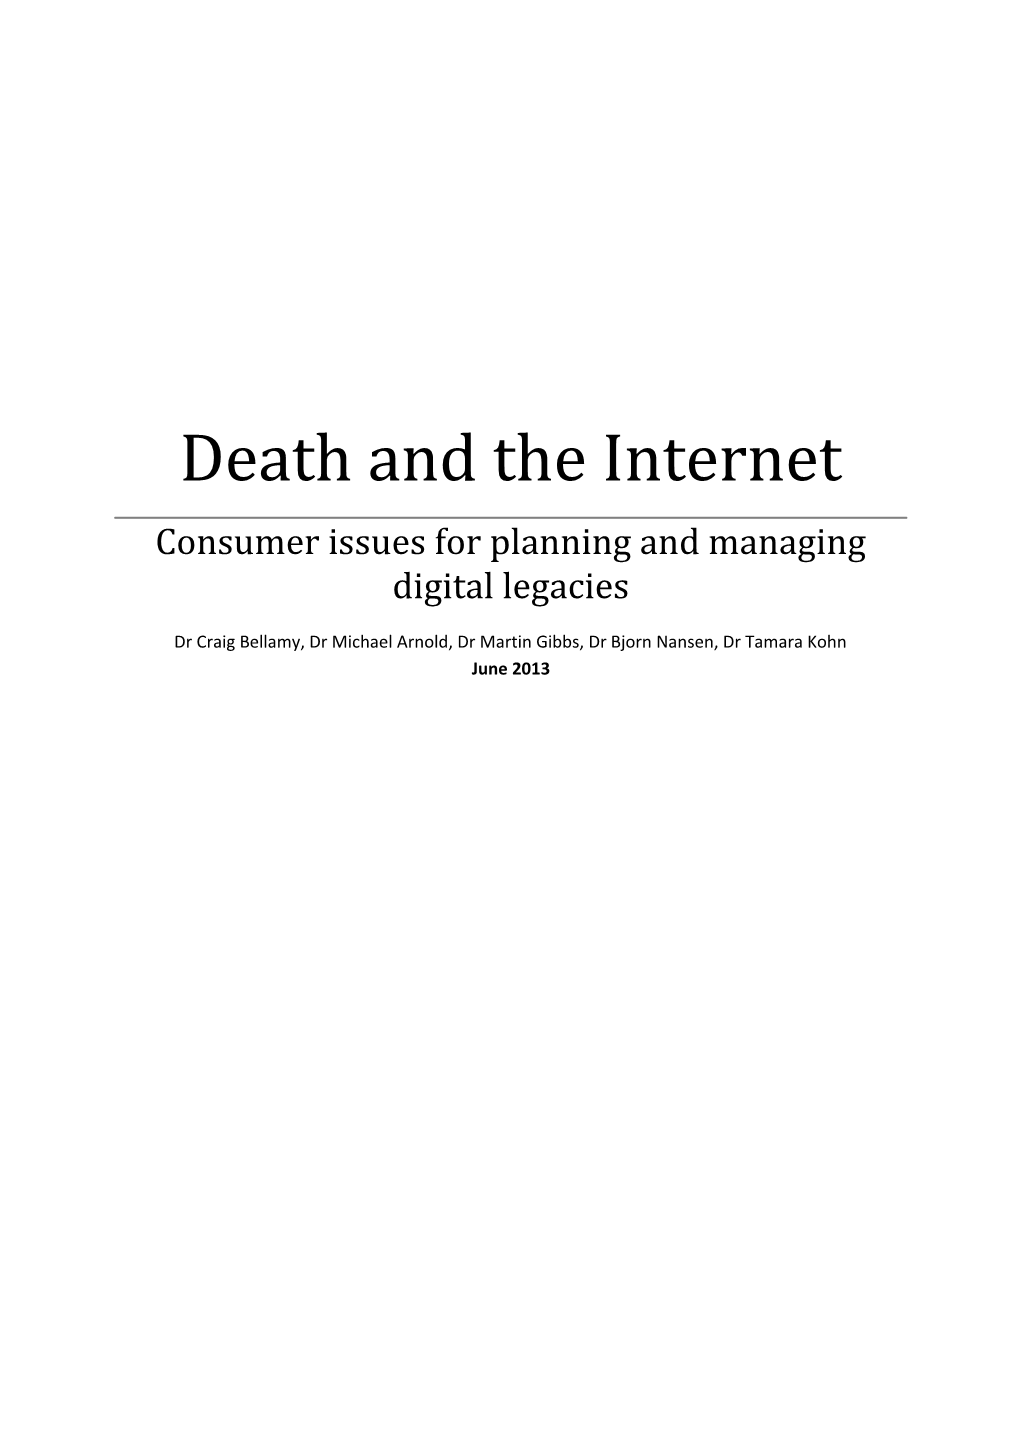 Death and the Internet: Consumer Issues for Planning and Managing Digital Legacies